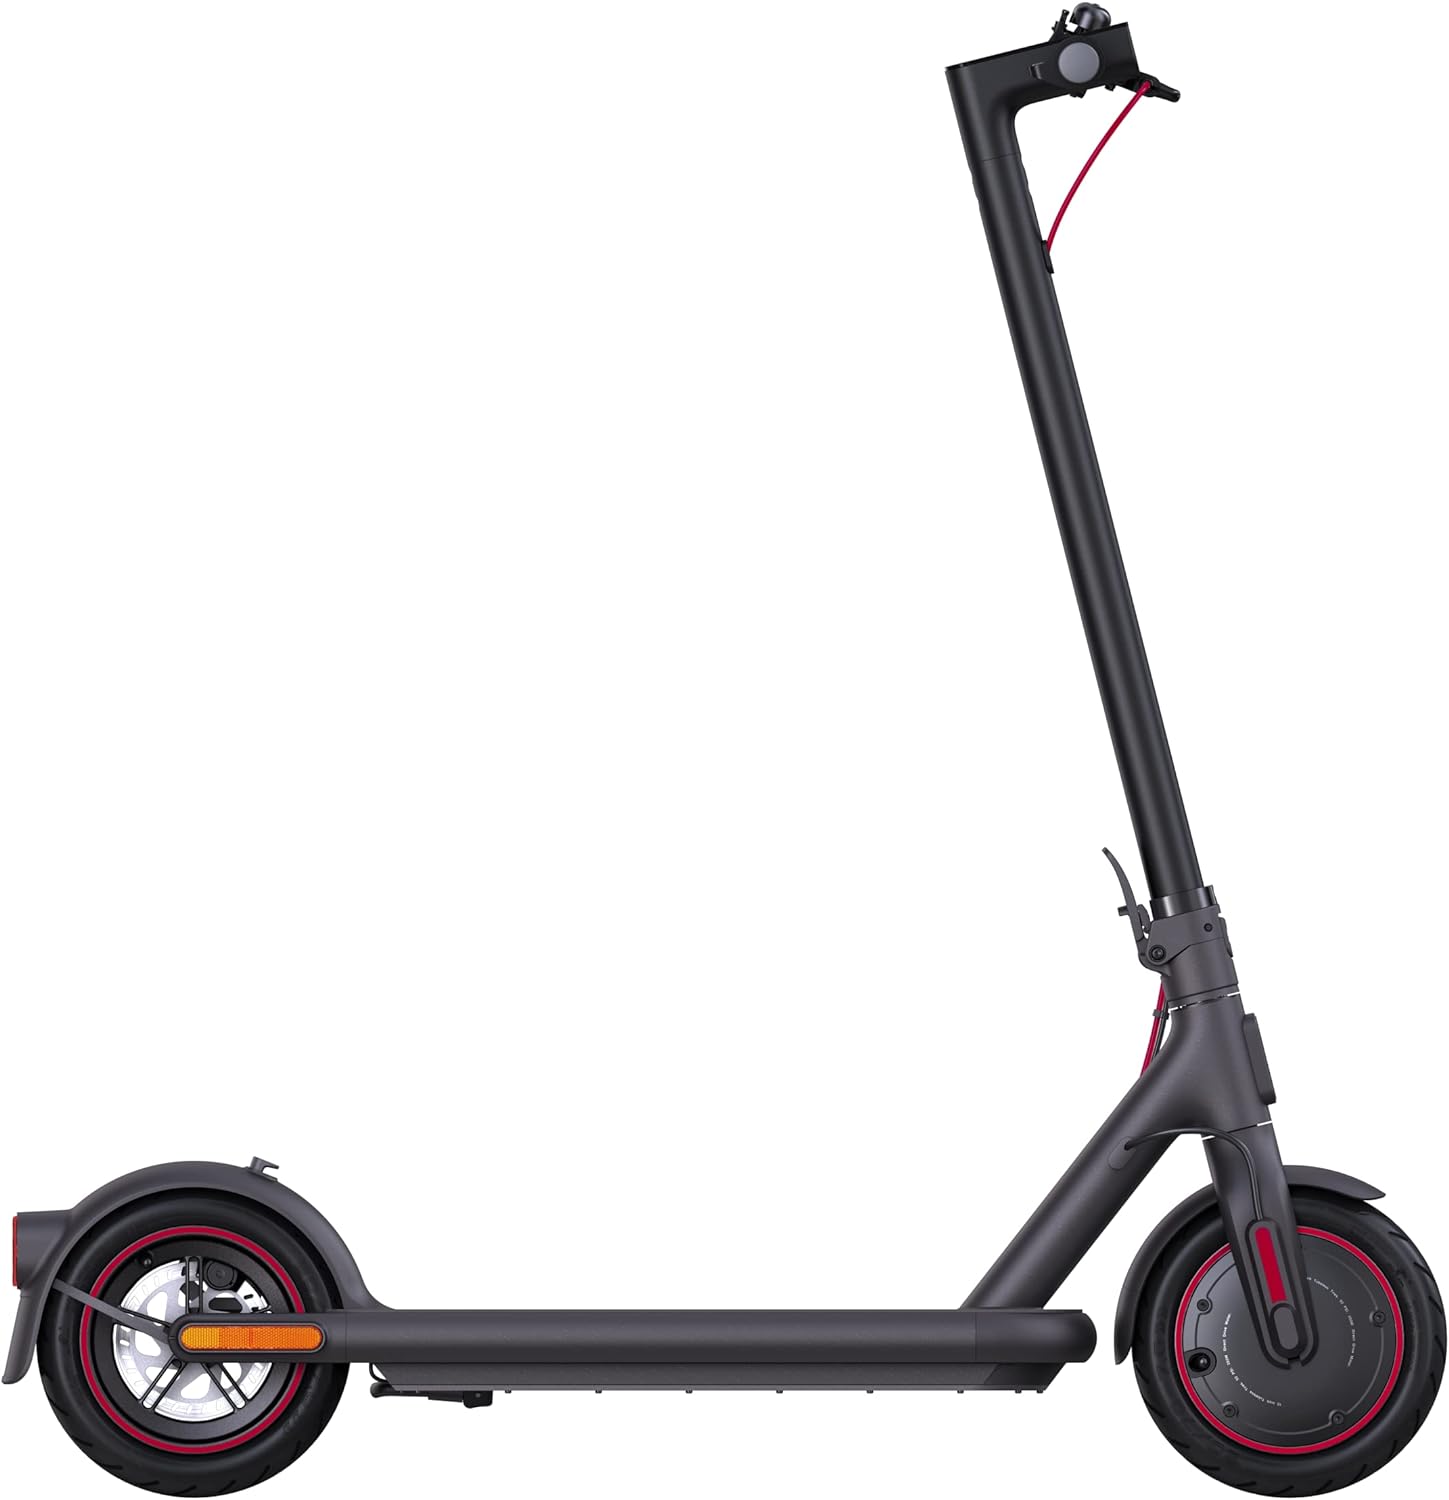 Xiaomi Electric Scooter 4 Pro Black with Dual Braking System up 25 Km/H Maximum Speed | 55km Super long range battery life | 10 inch self-sealing tires